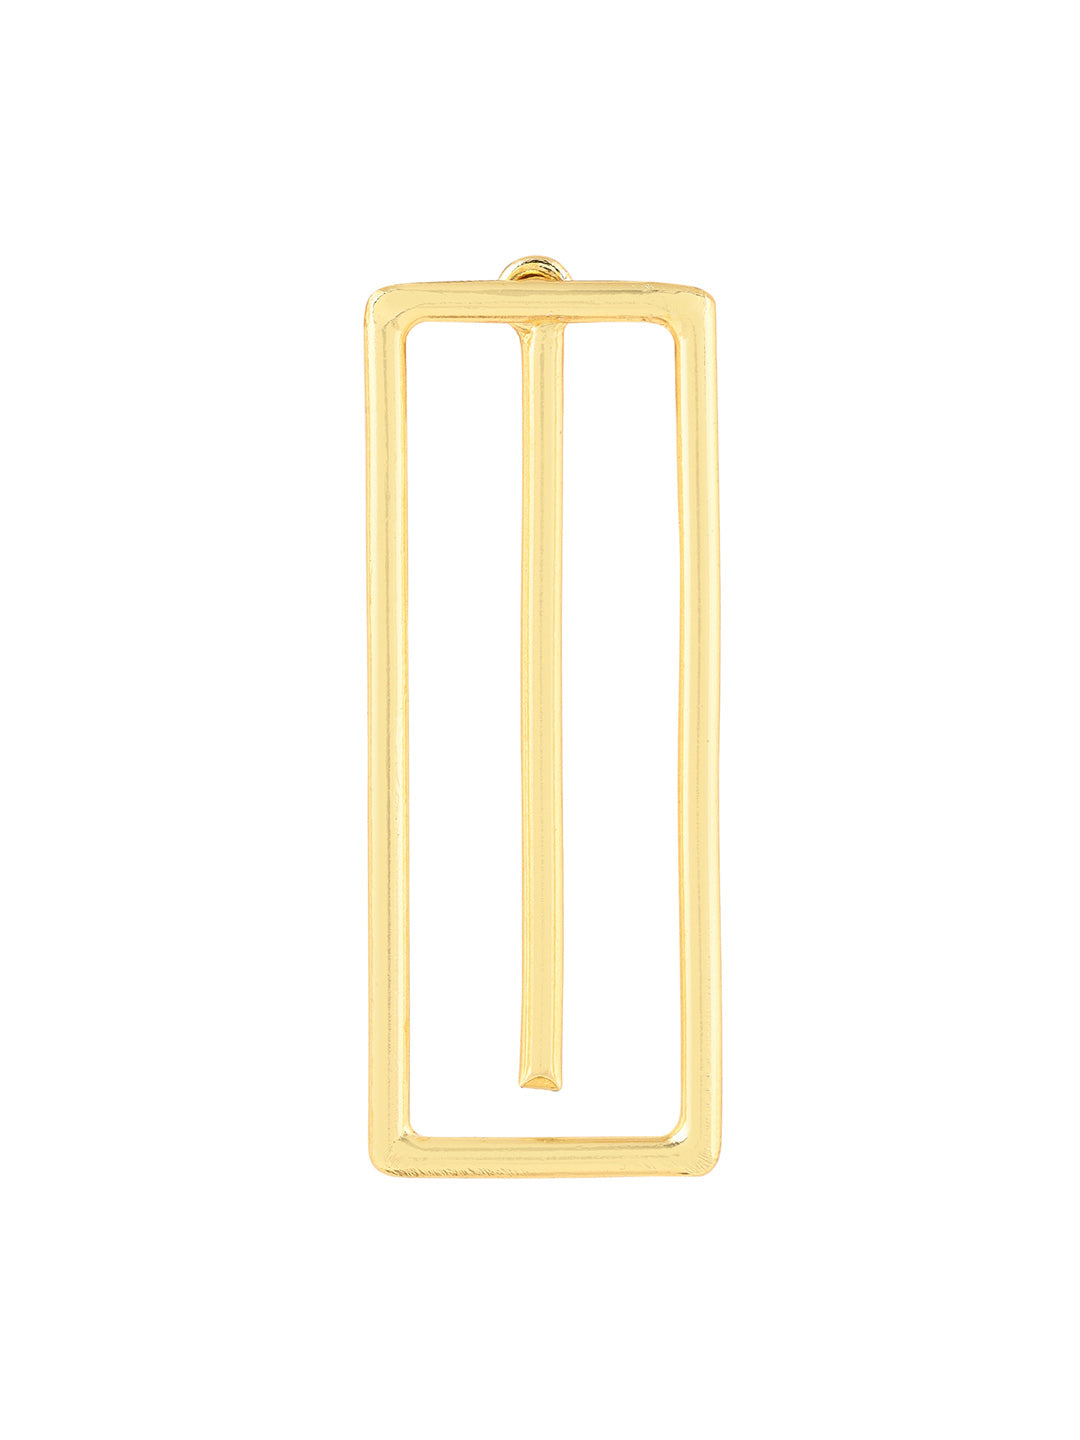 Priyaasi Rectangle Shaped Gold Plated Earrings